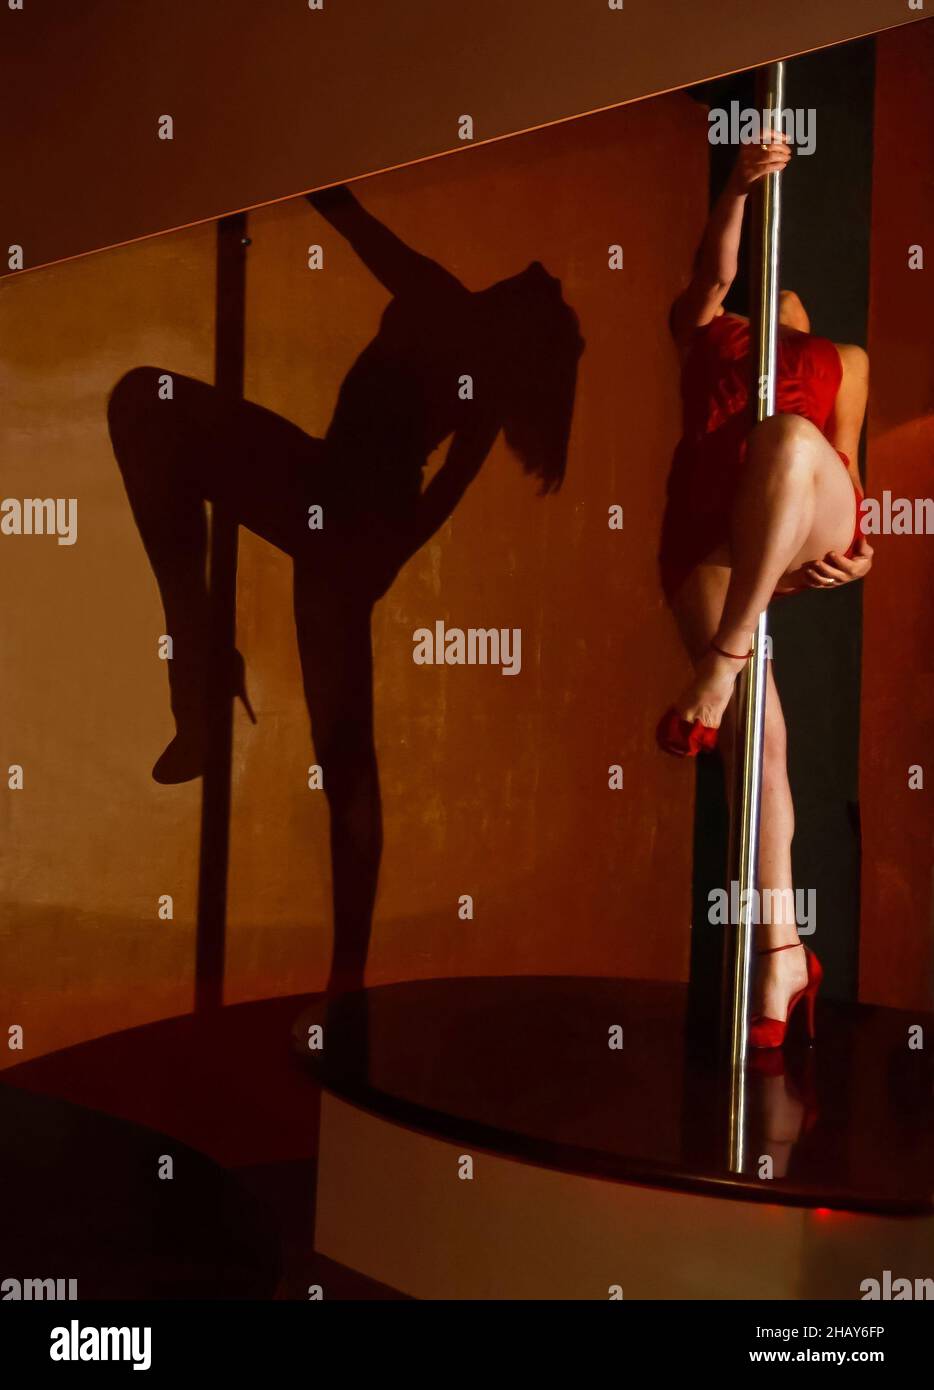 Slim young woman pole dancer on the pole Stock Photo